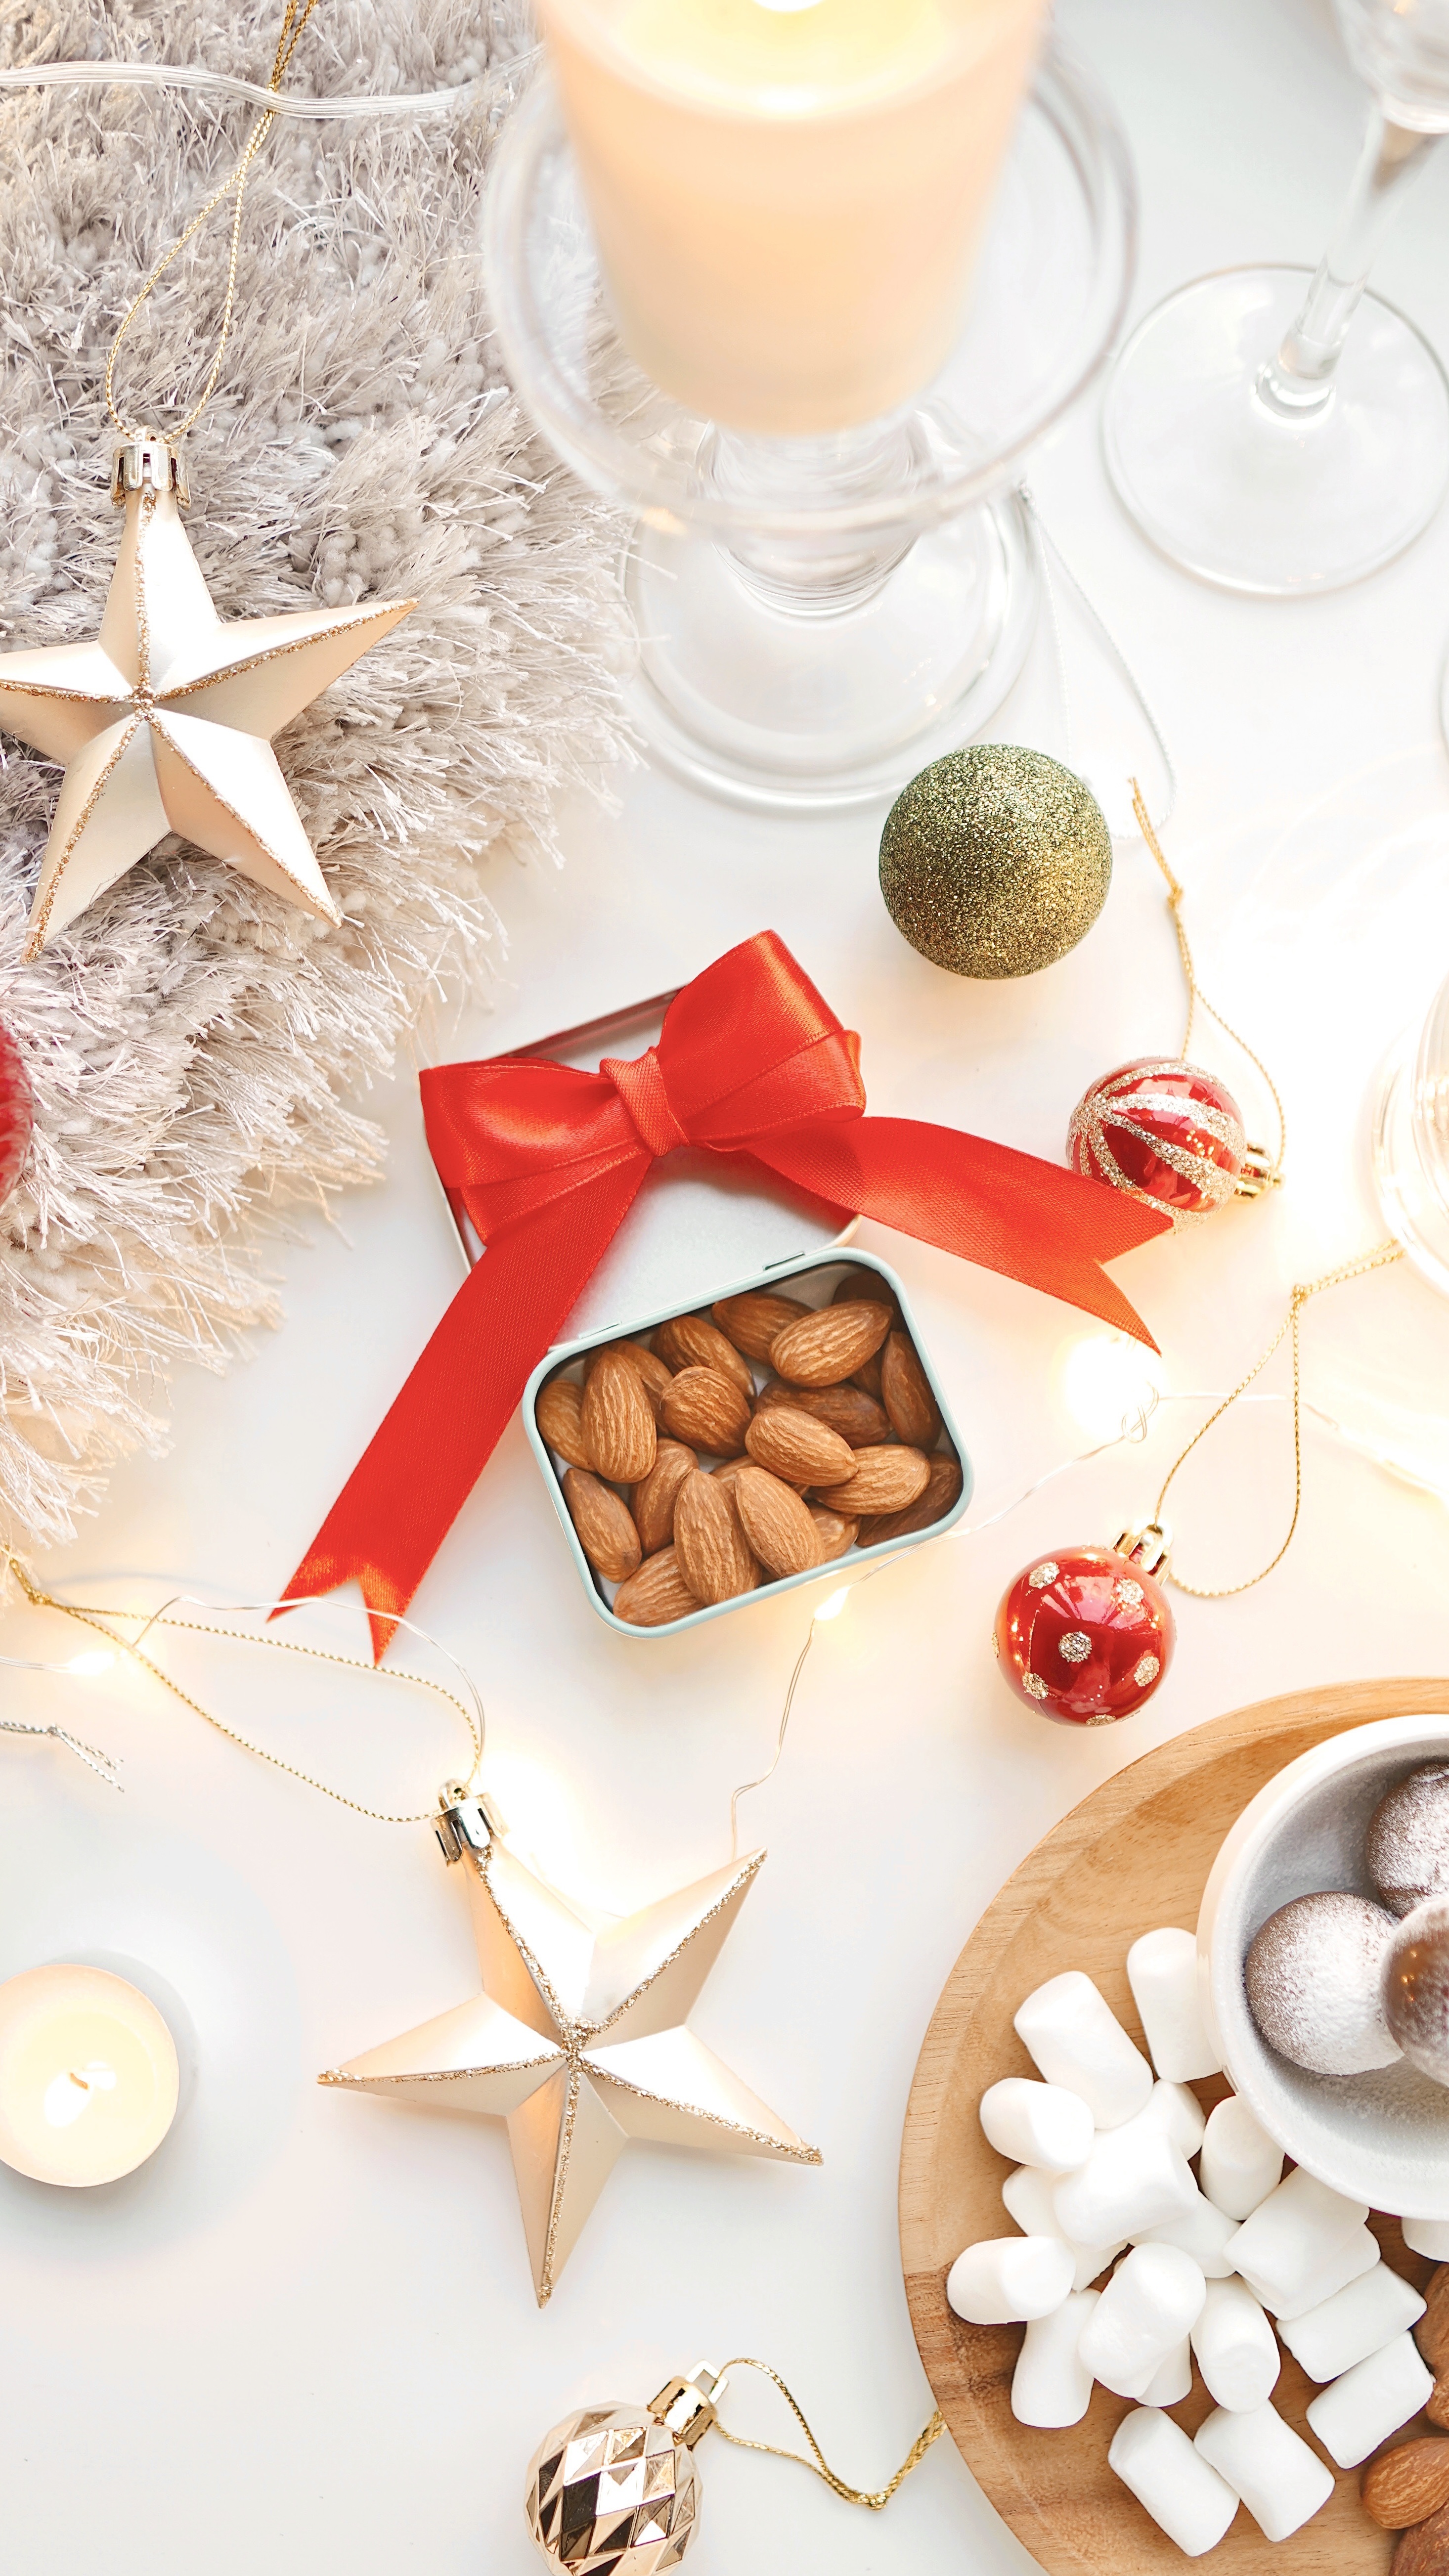 Celebrate this Christmas mindfully with a handful of almonds!